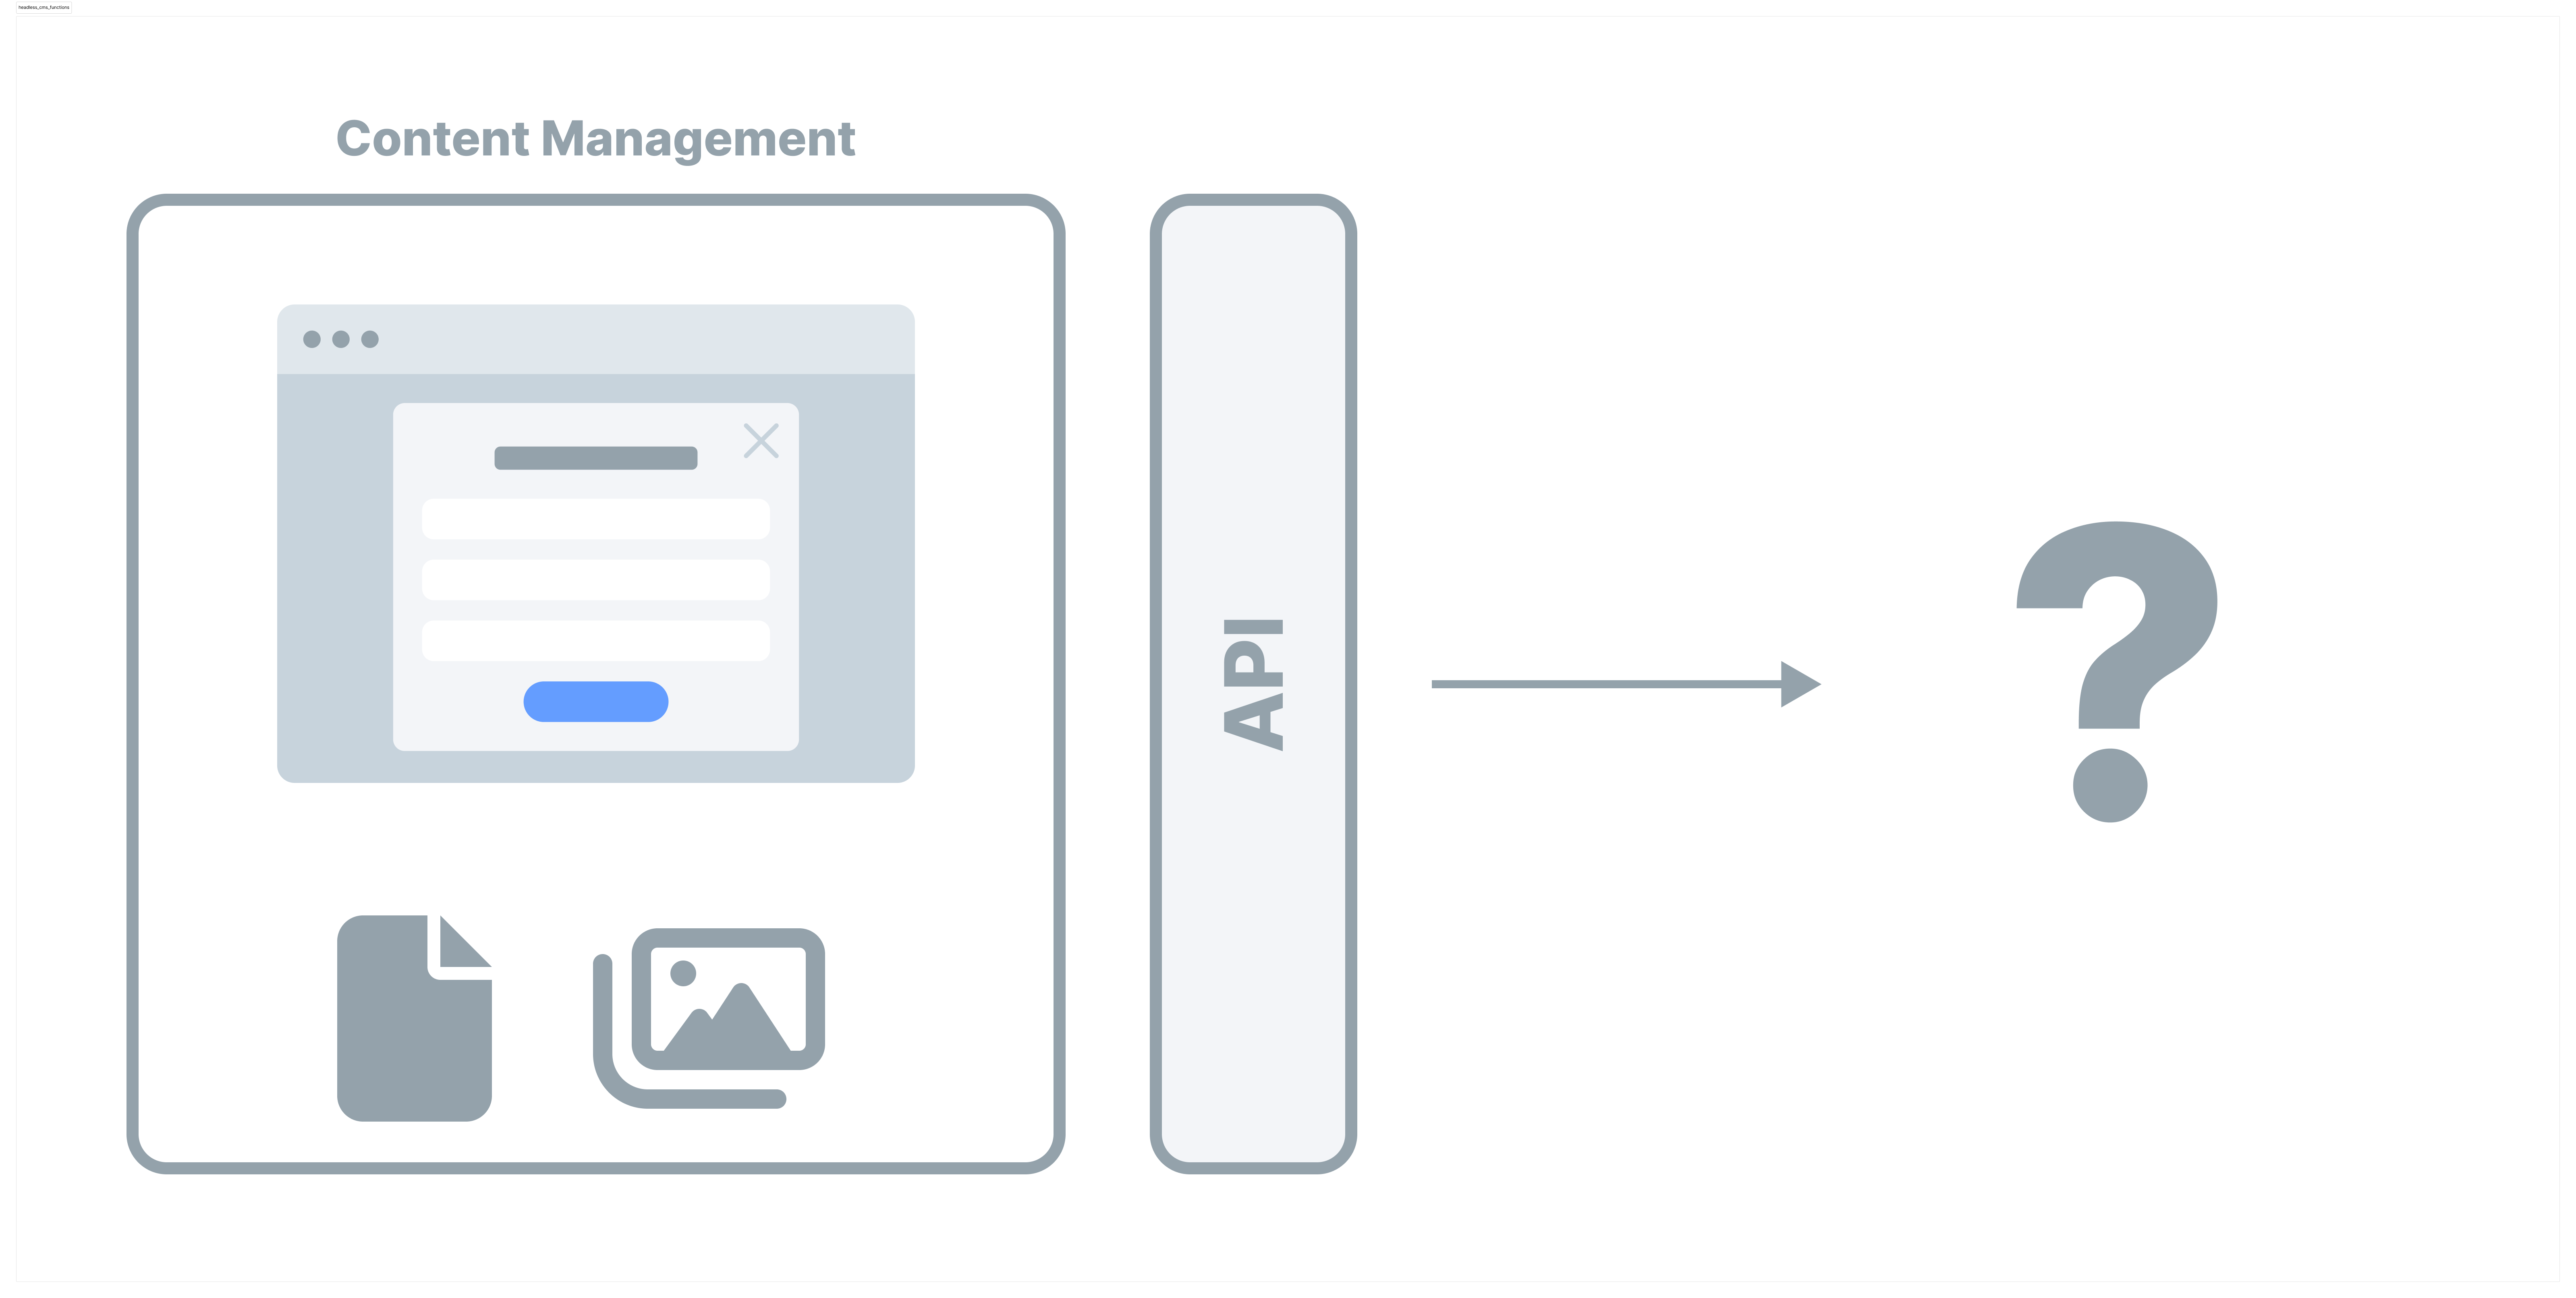 Content management and content presentation in a headless CMS